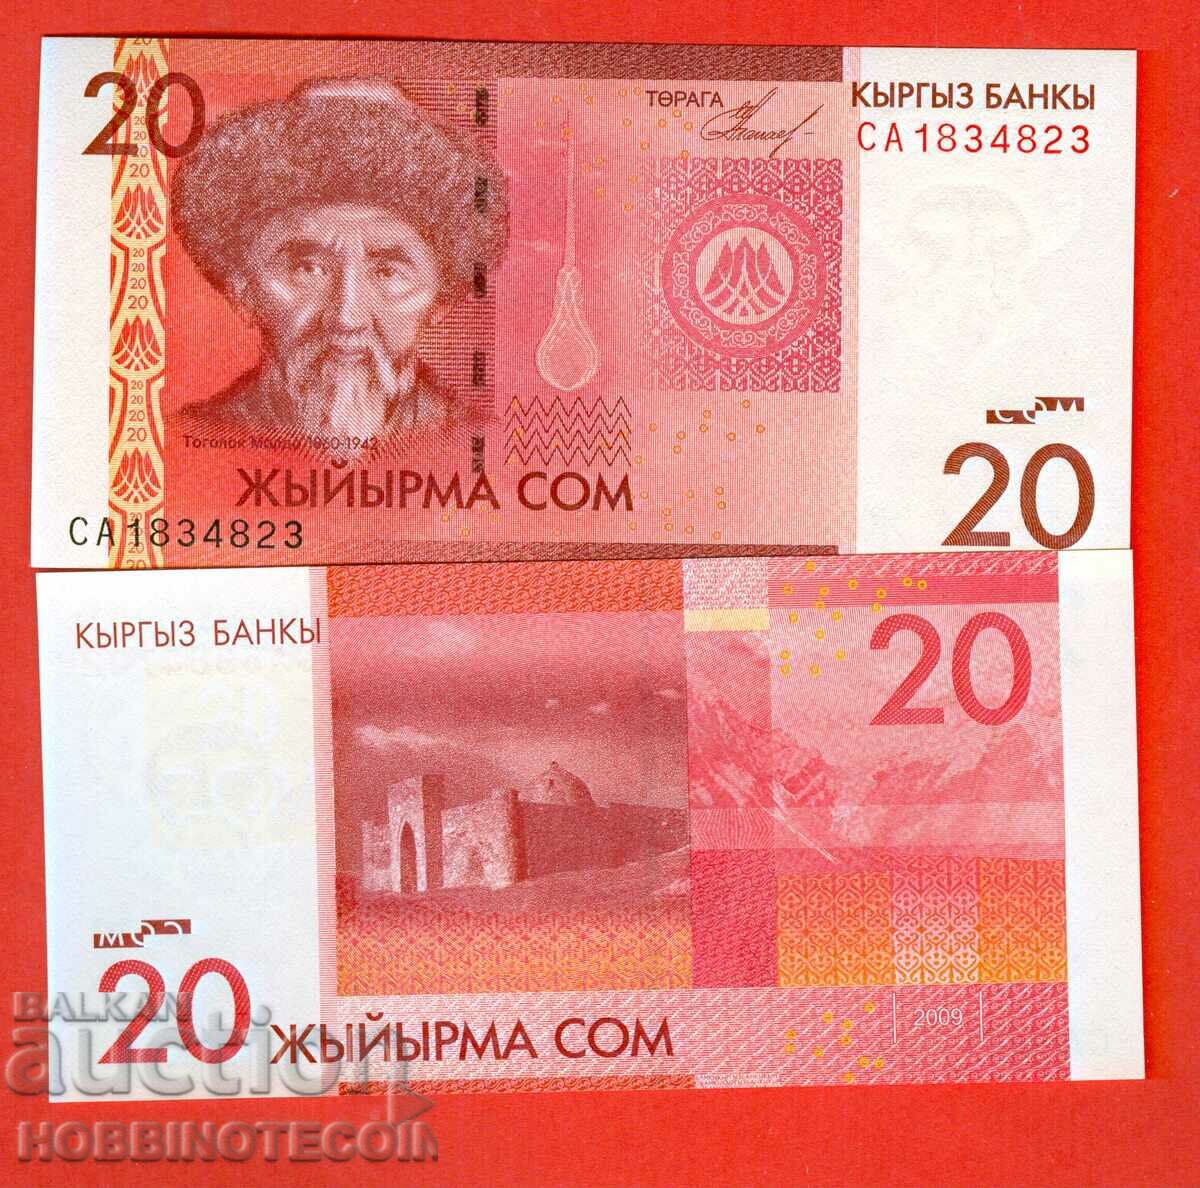 KYRGYZSTAN KYRGYZSTAN 20 Som issue issue 2016 NEW UNC